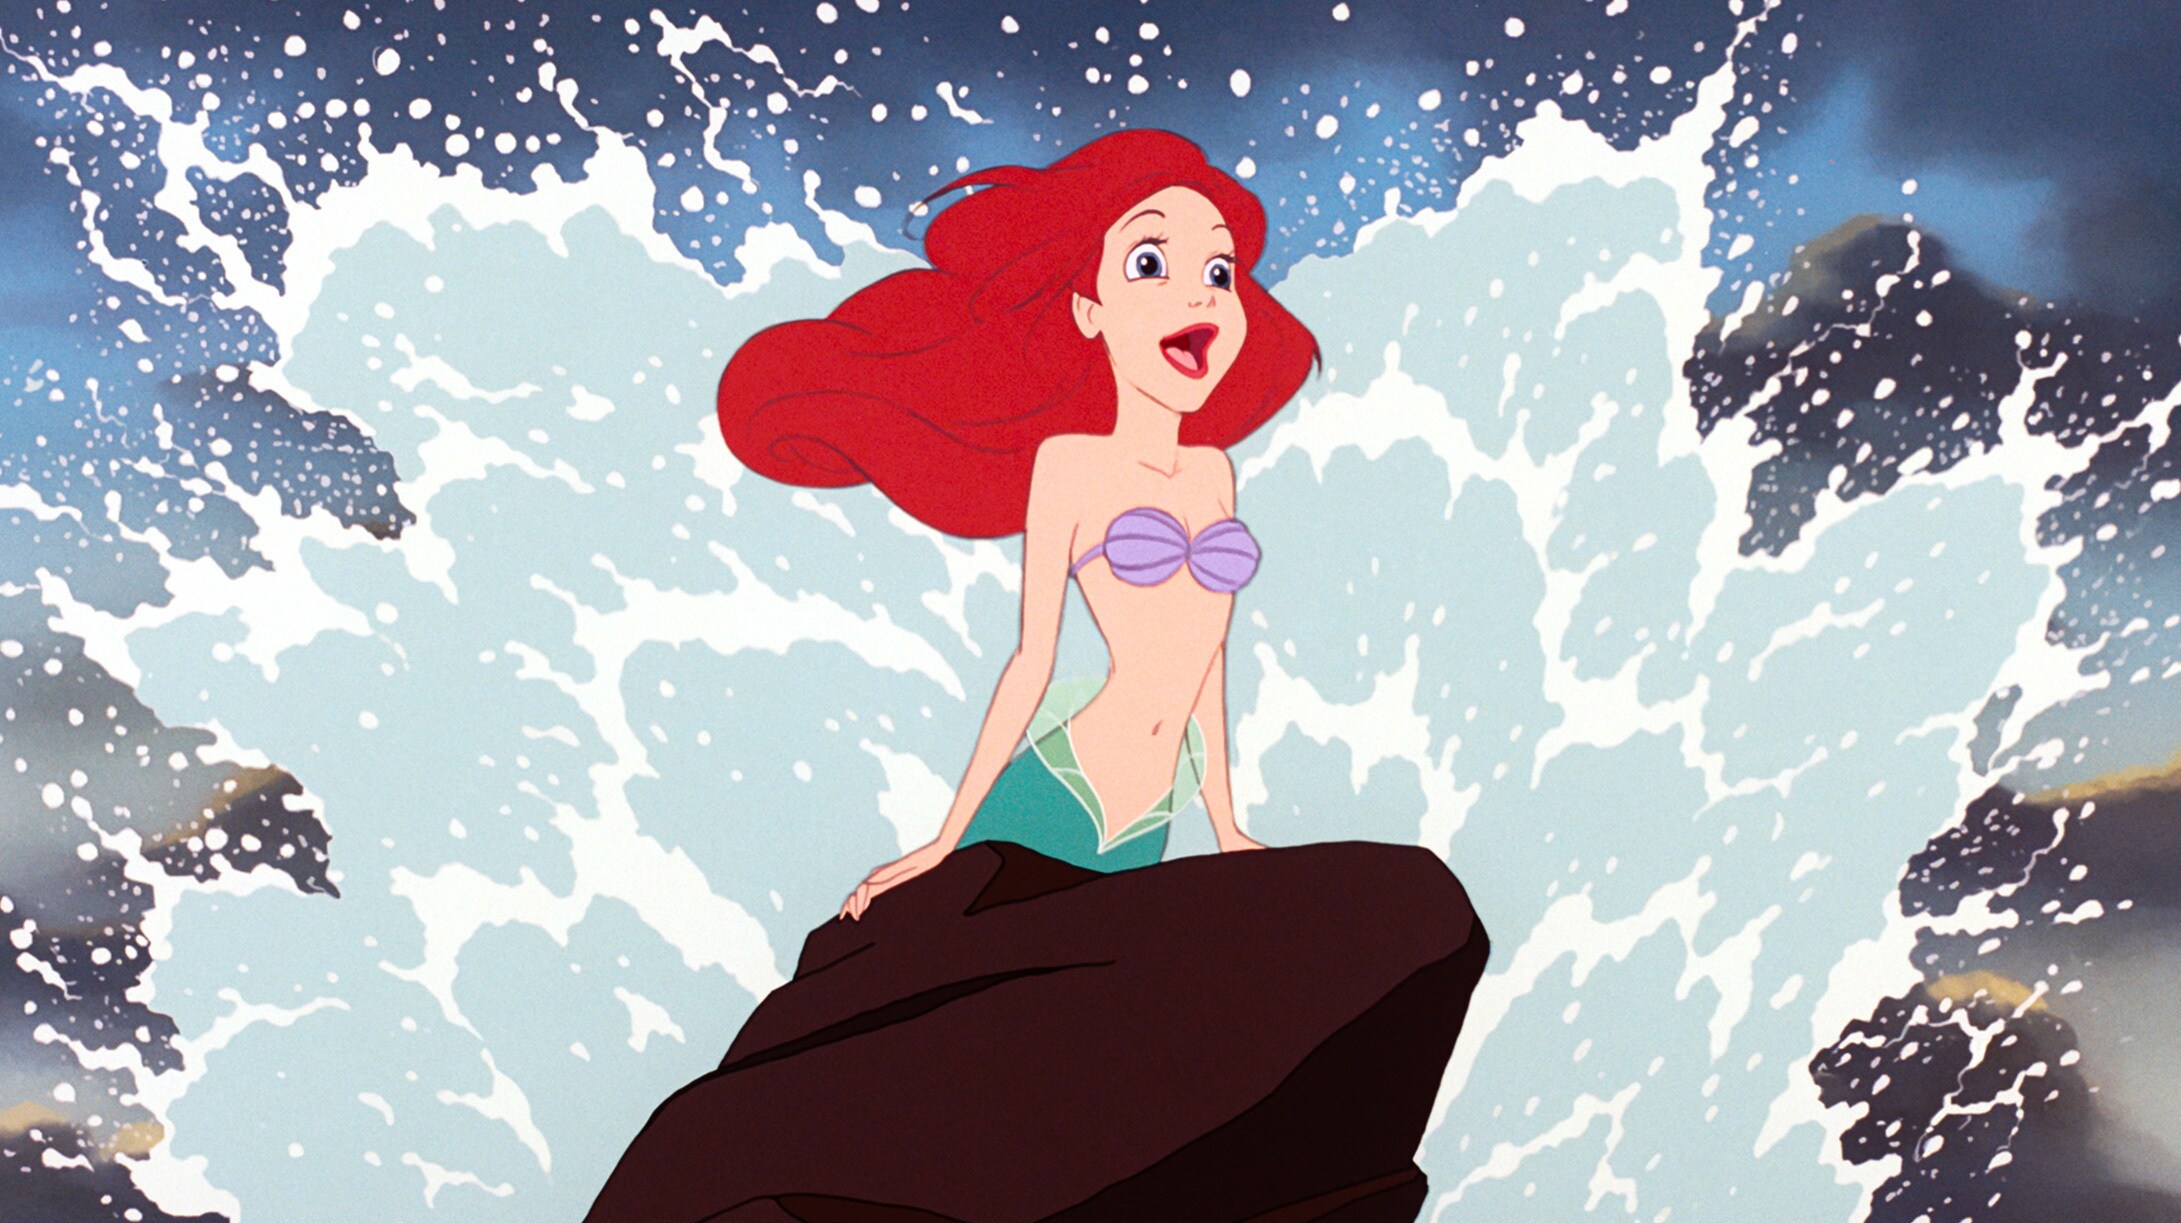 Ariel wishing to be a part of the human world.